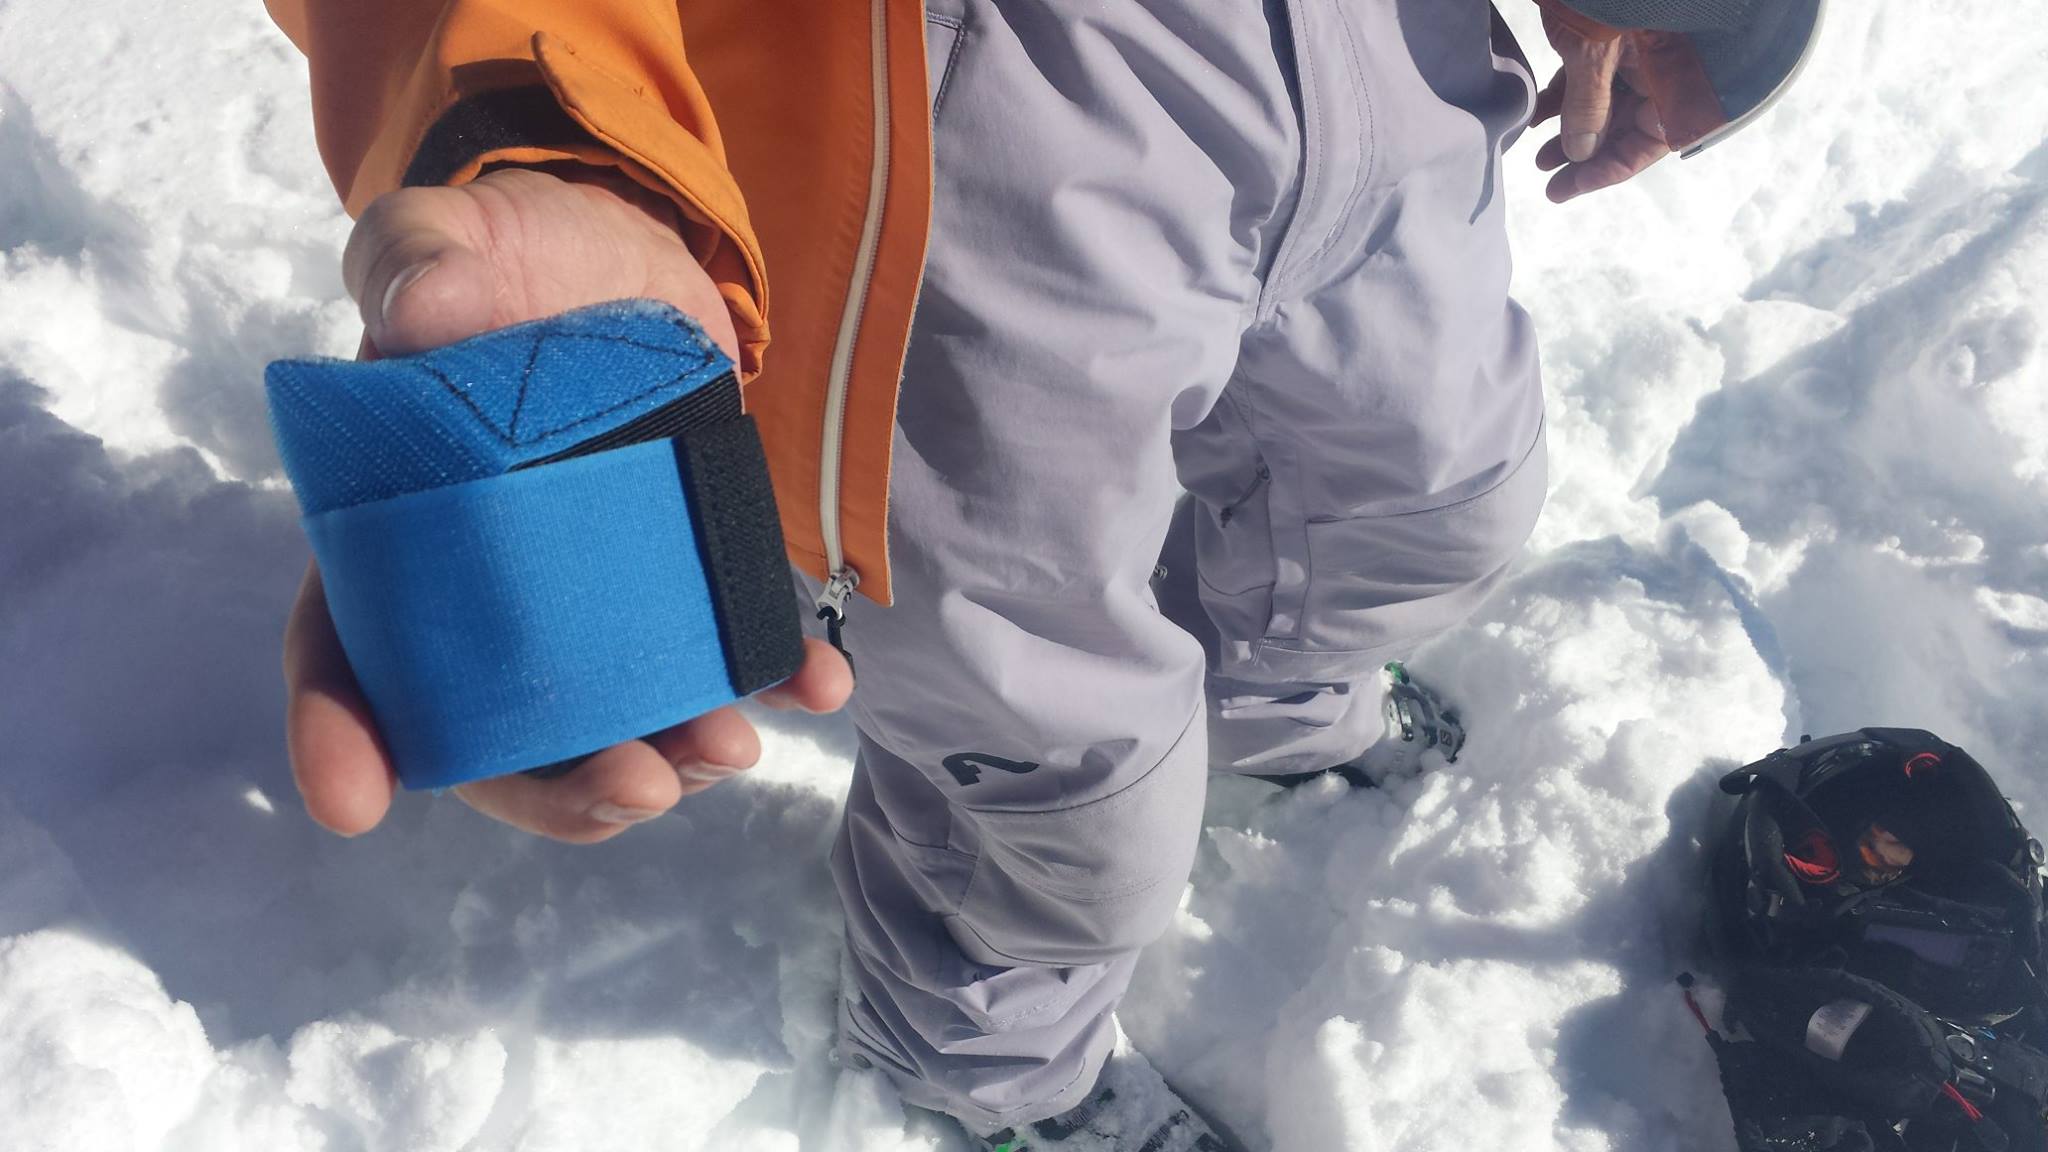 DesertSnowJunkies.com » Review: Pocket Ski Carriers for “Hike-To” Skiing